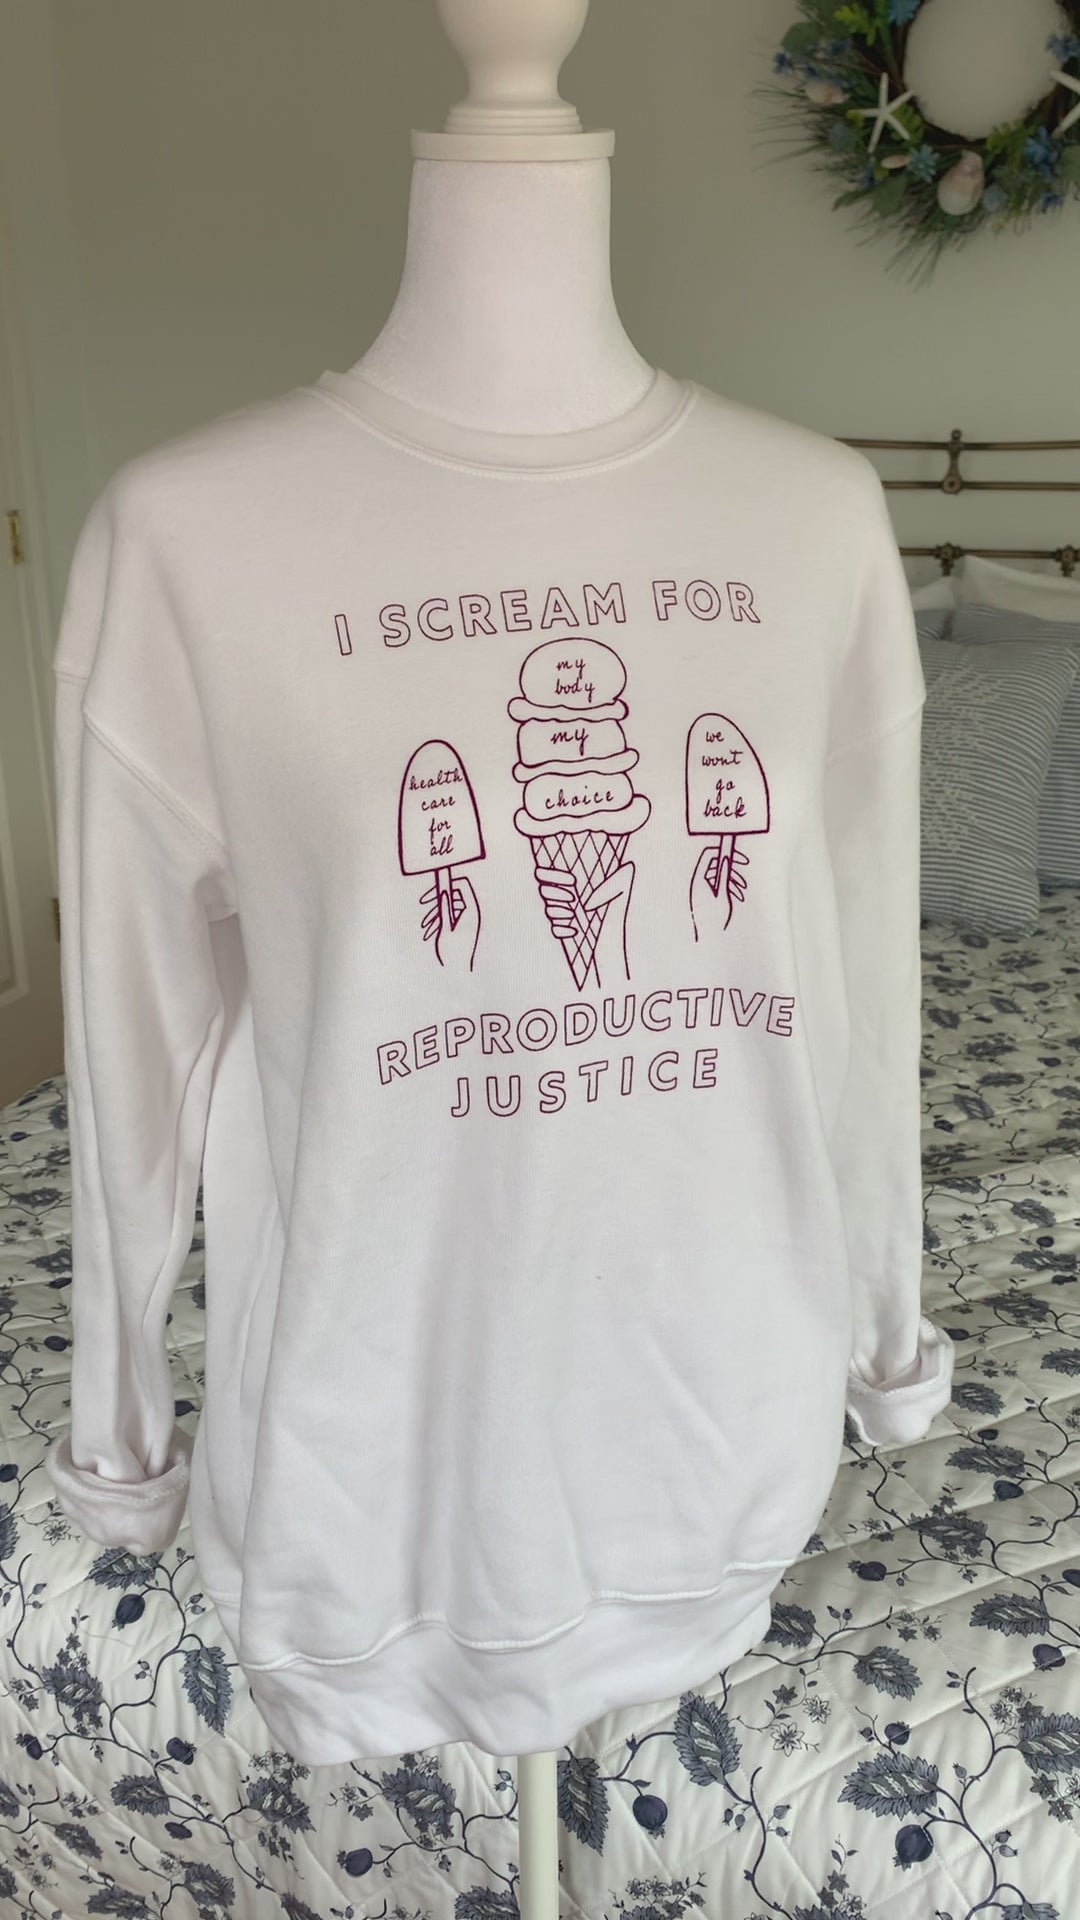 A white crewneck sweatshirt that reads "I scream for reproductive justice" hangs on a manikin